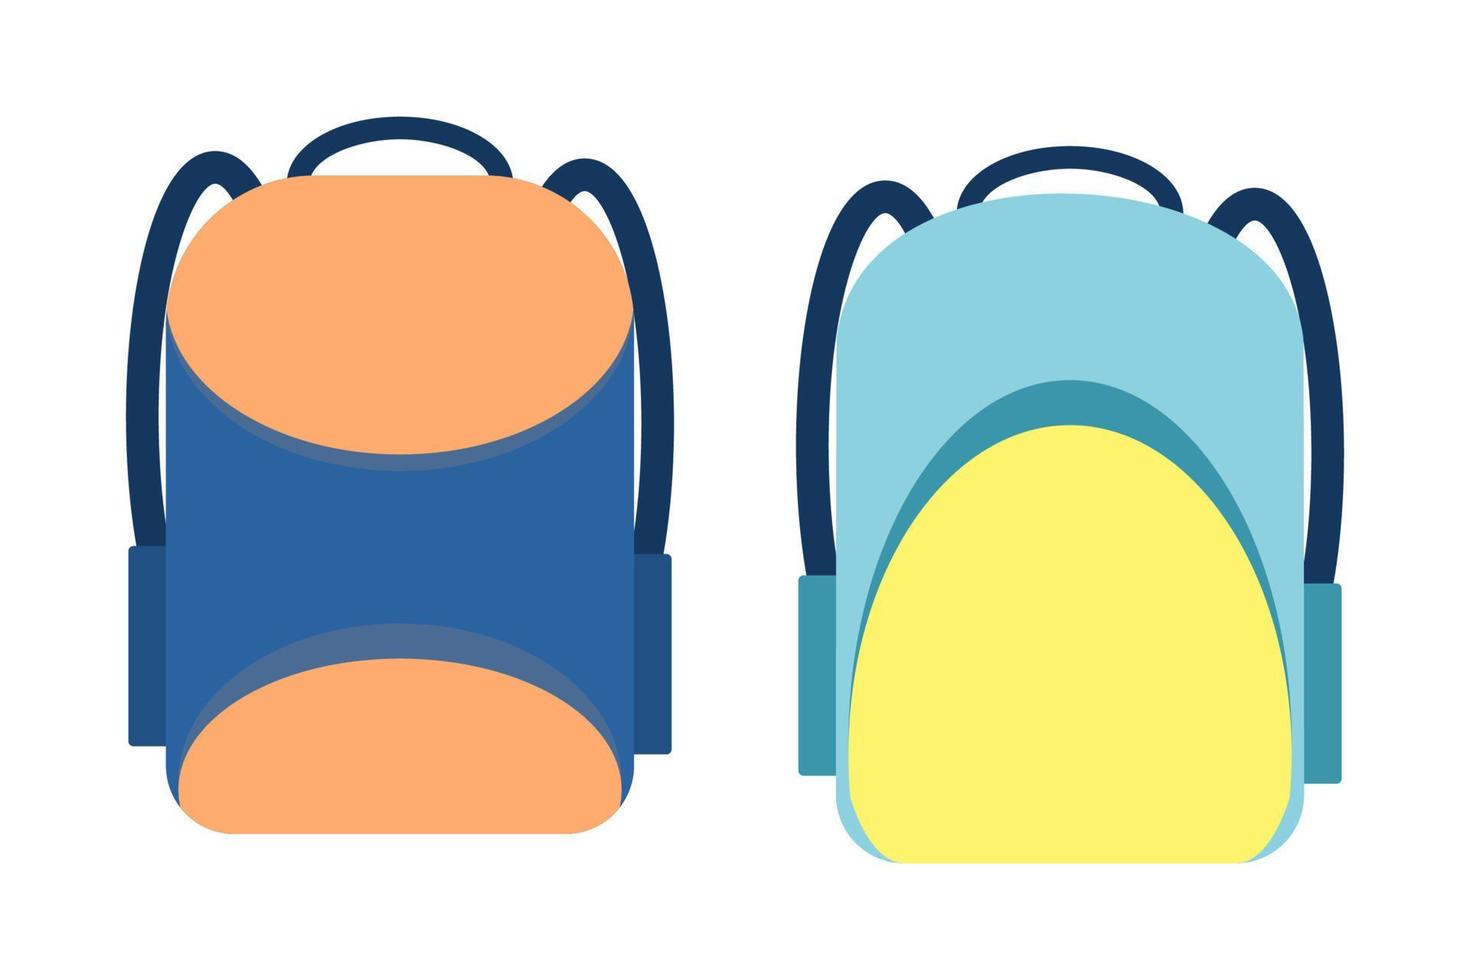 School bags and backpacks. College and school boy and girl student bags. Back to school flat illustration. Set of cute and colorful cartoon style school bags. vector